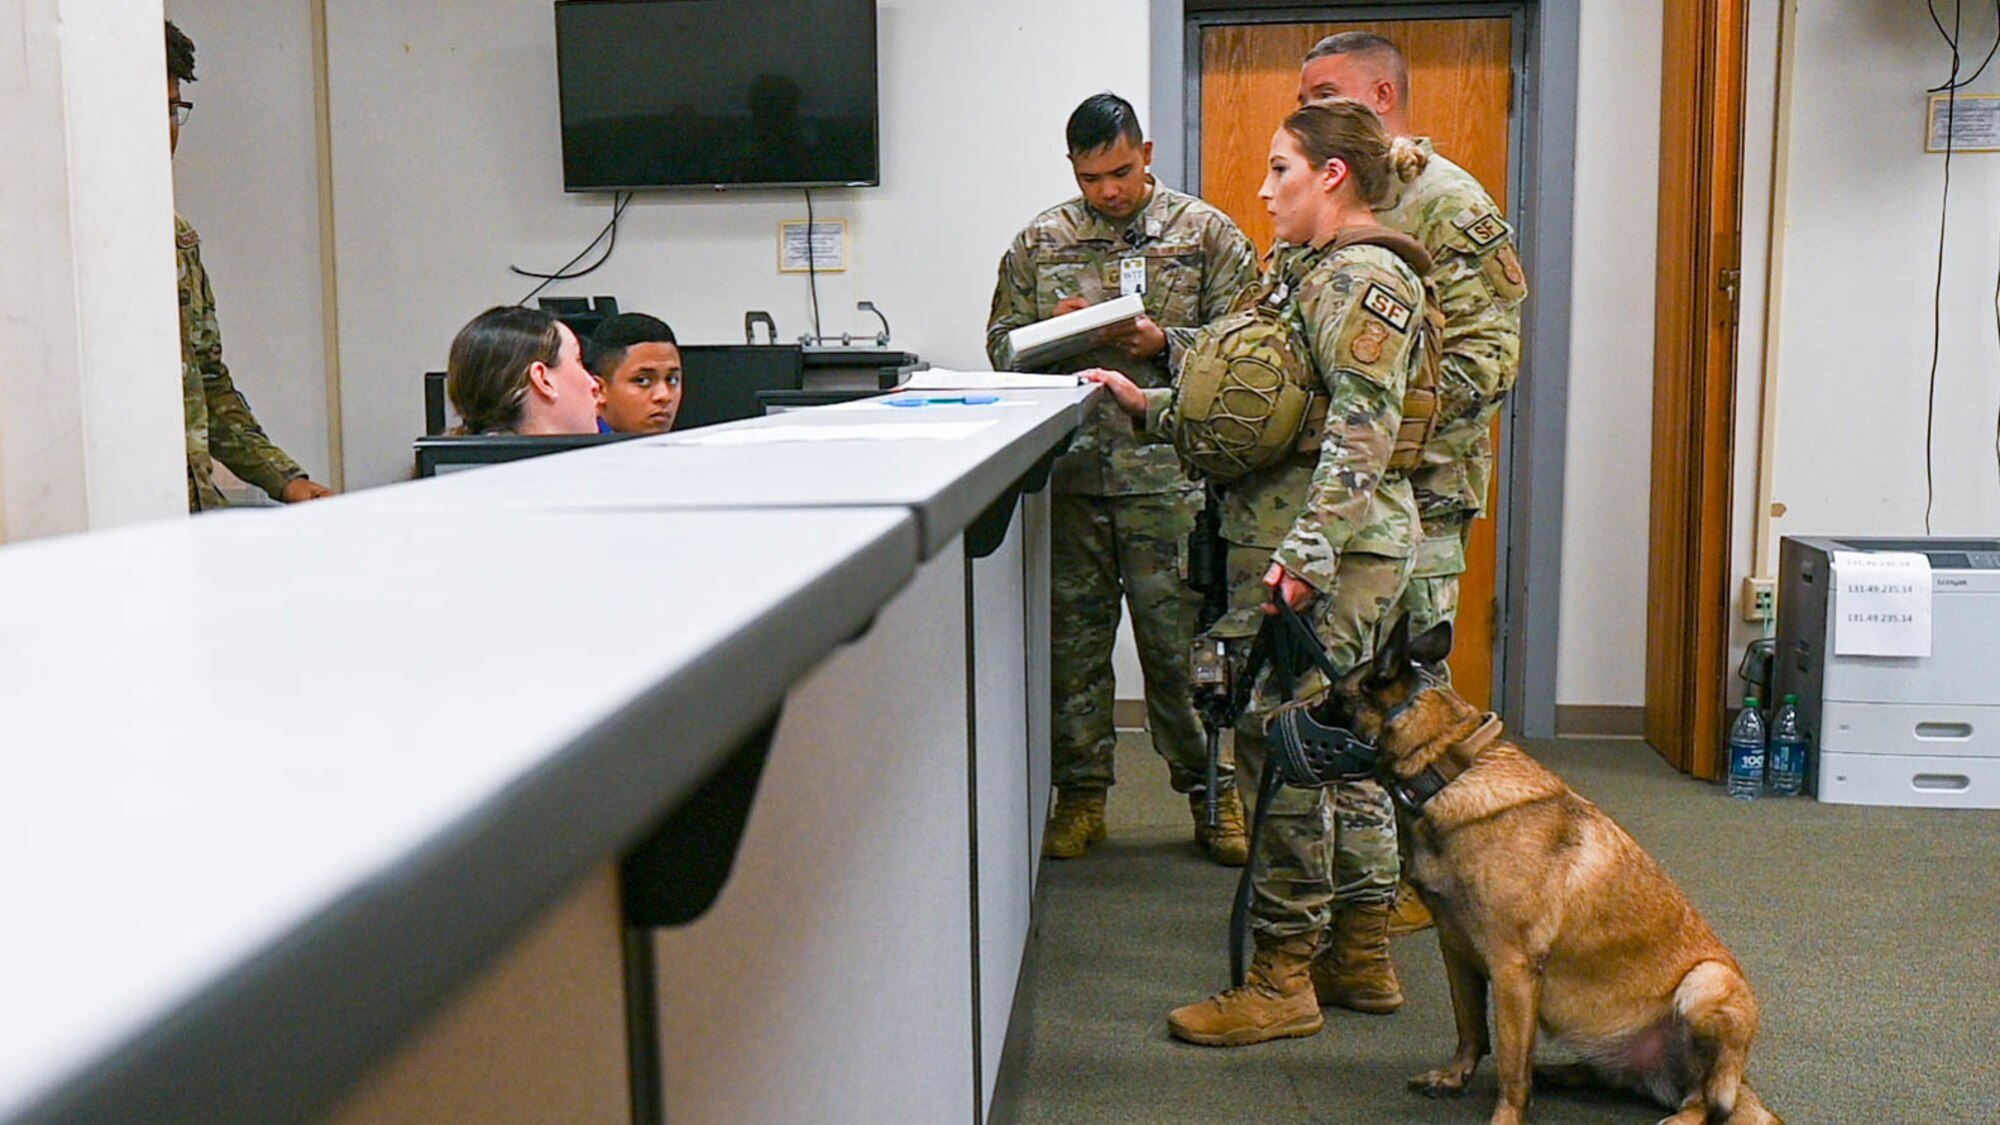 Senior Airman Christal Schaff, 647th Security Forces Squadron military working dog  handler, and military working dog Ula, process through the pre-deployment function line at Joint Base Pearl Harbor-Hickam, Hawaii, during the Joint Base Readiness Exercise, Feb. 28, 2022. The pre-deployment function line ensures airmen are equipped with proper documentation and essentials prior to deployment. (U.S. Air Force photo by Senior Airman Makensie Cooper)